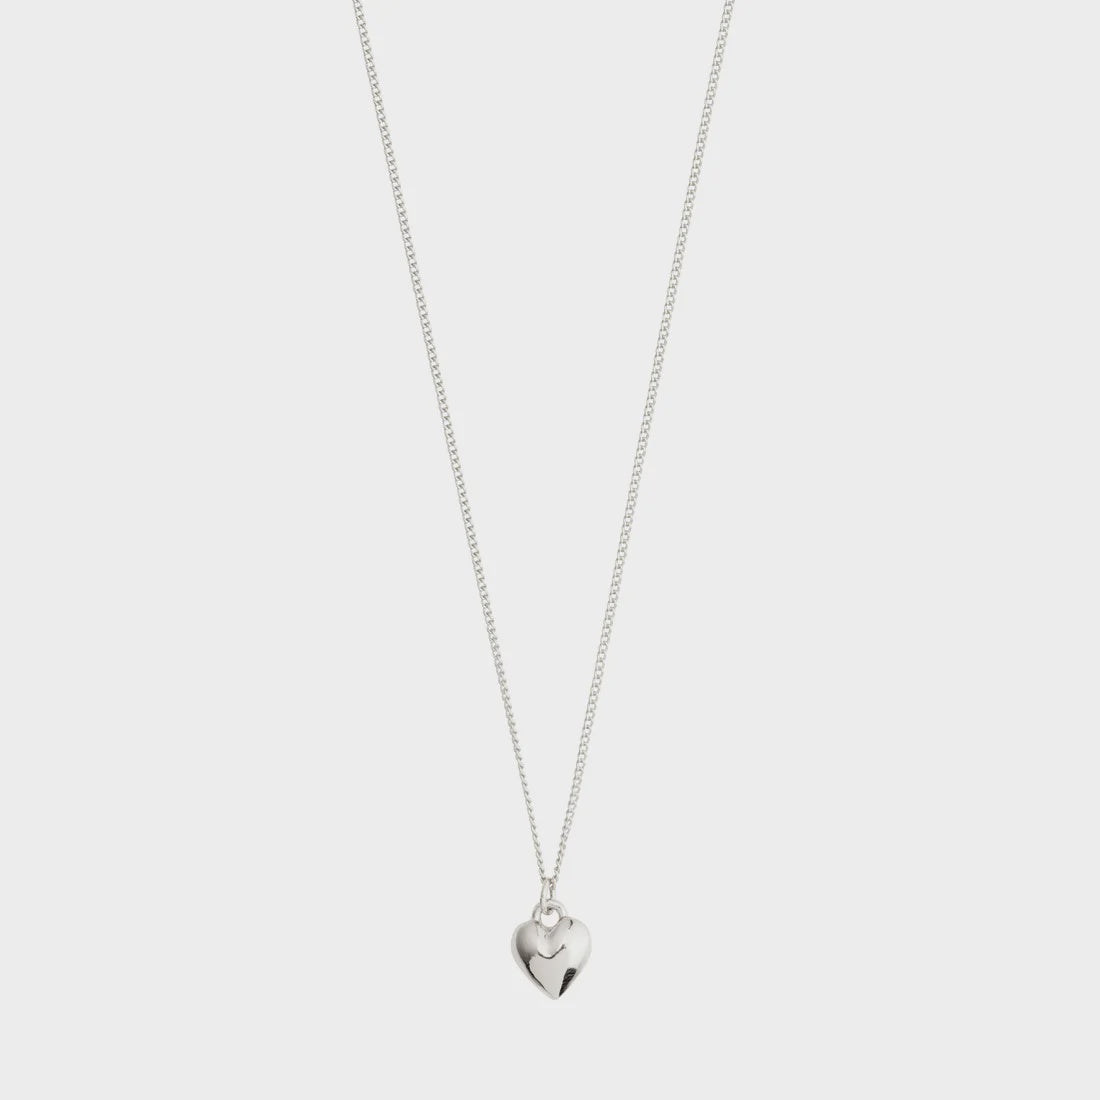 Afroditte Heart Necklace - silver